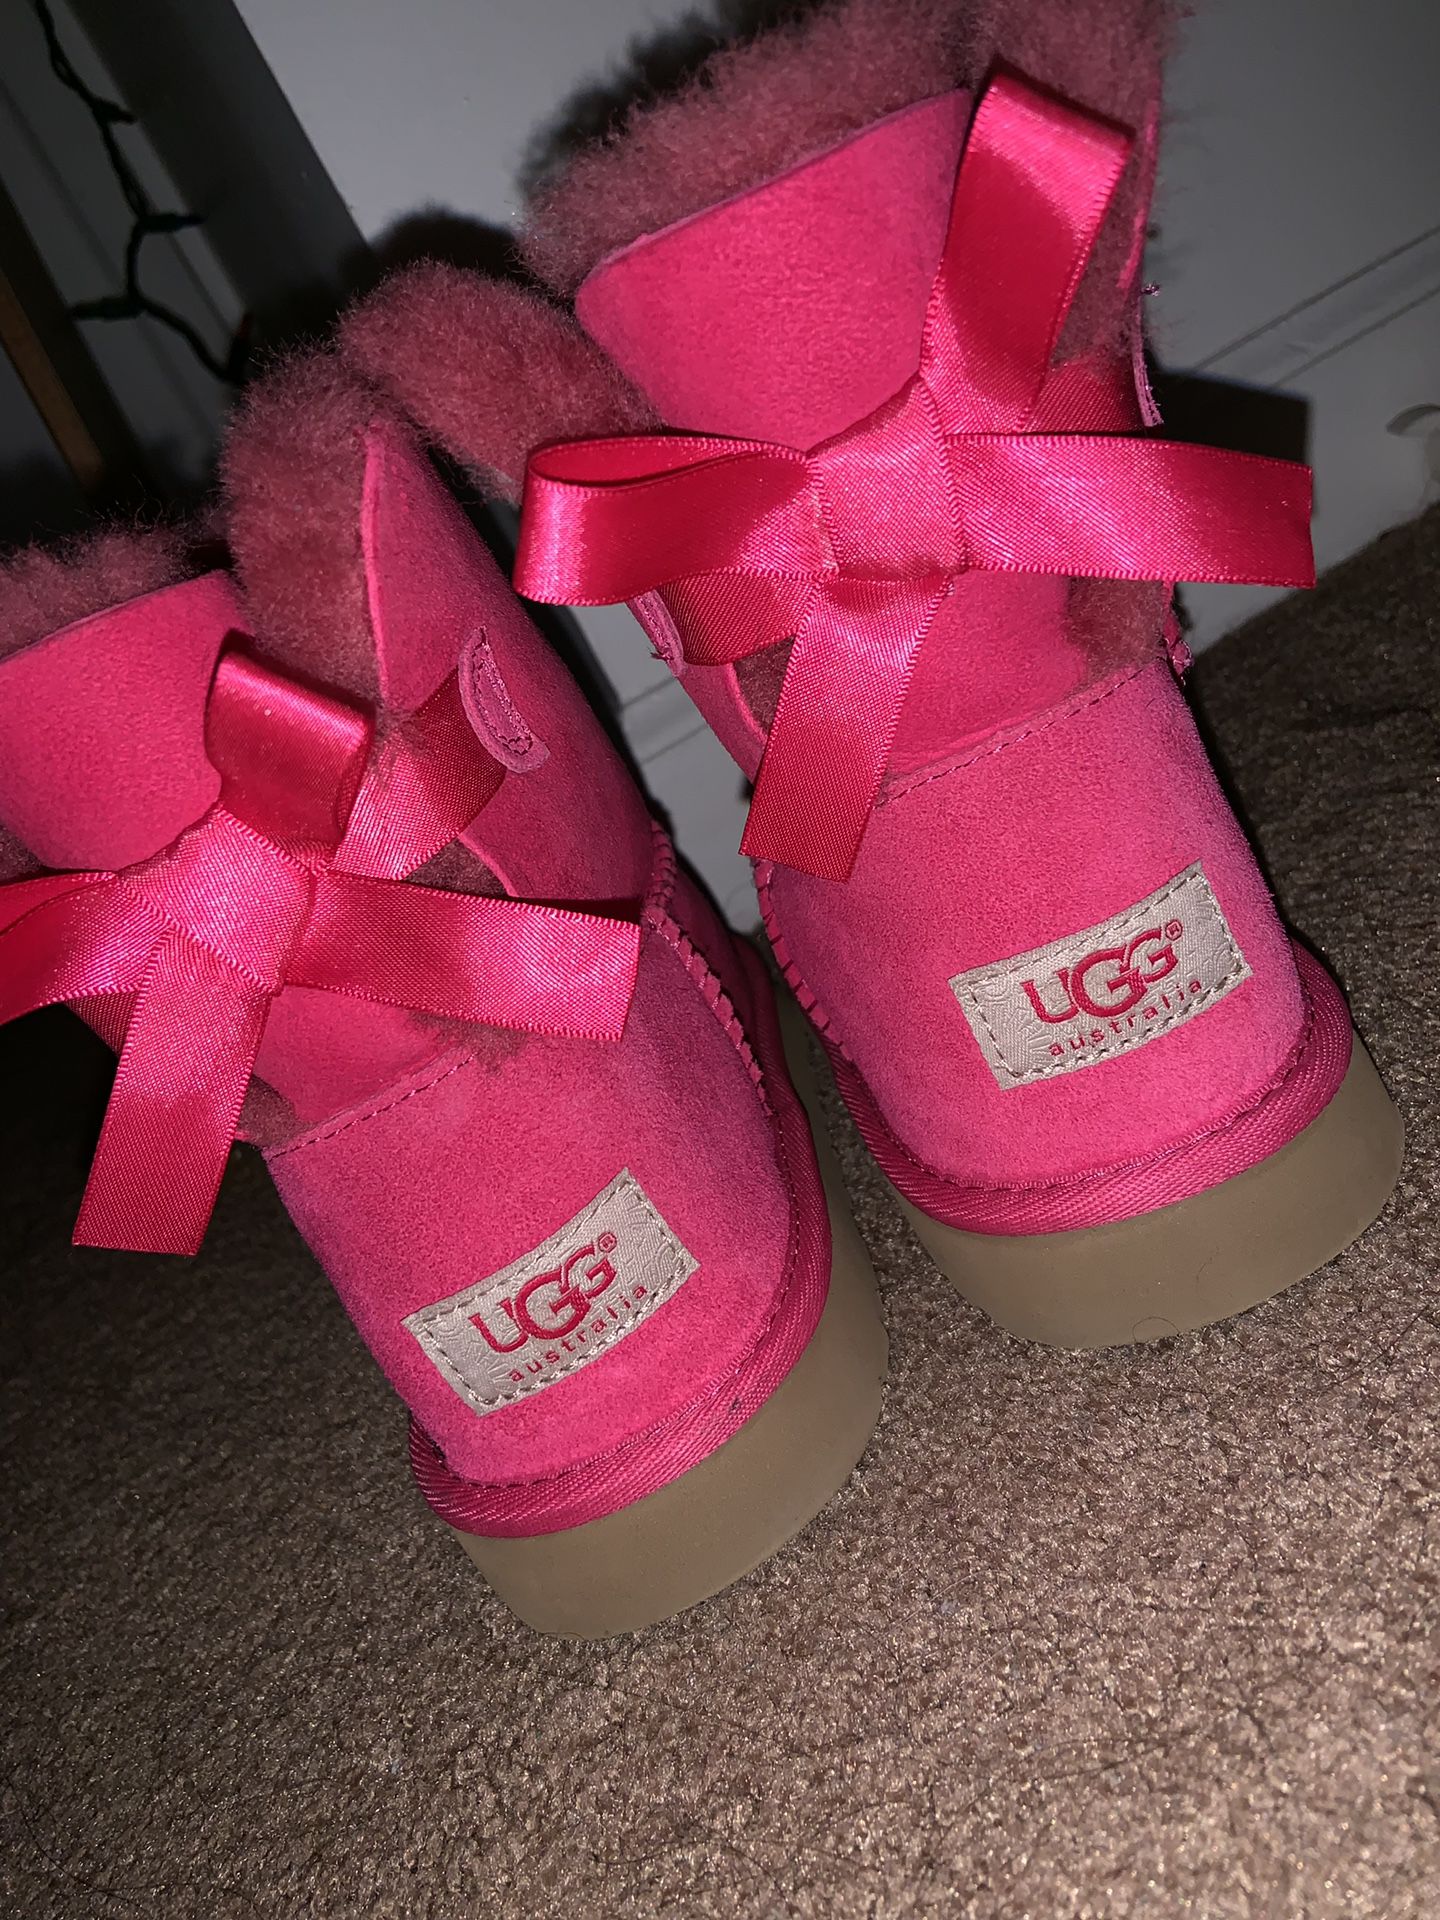 *BRAND NEW UGGS HOT PINK BAILEY BOW